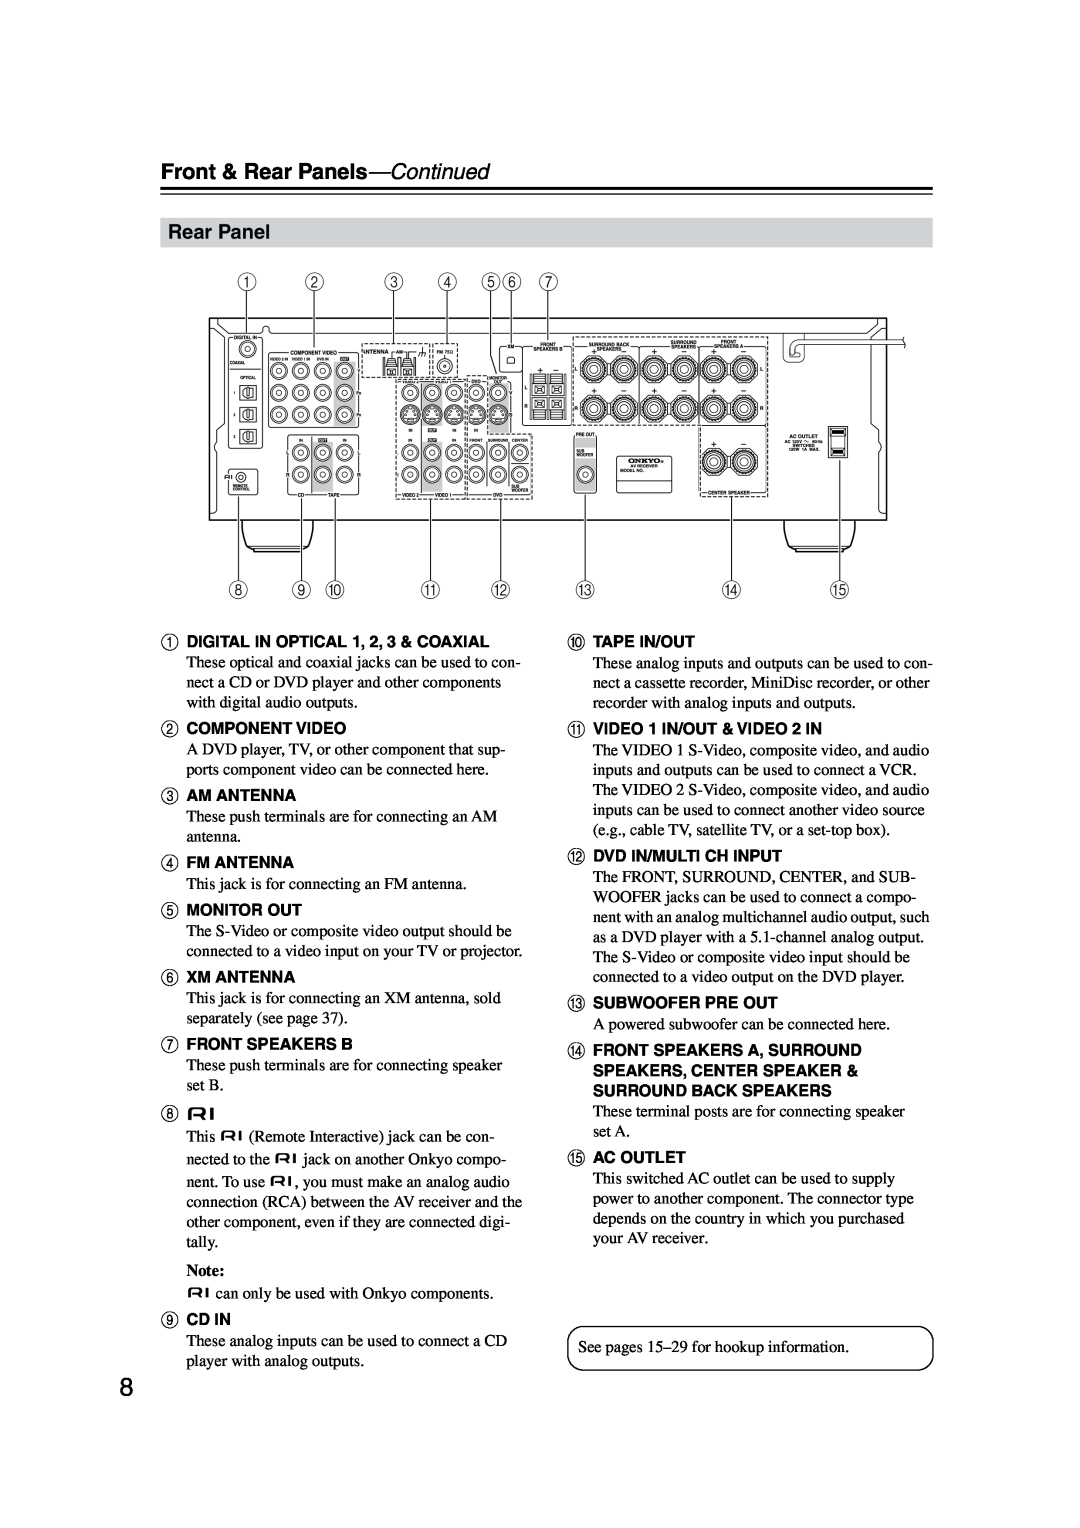 Onkyo TX-SR573 instruction manual Front & Rear Panels—Continued 